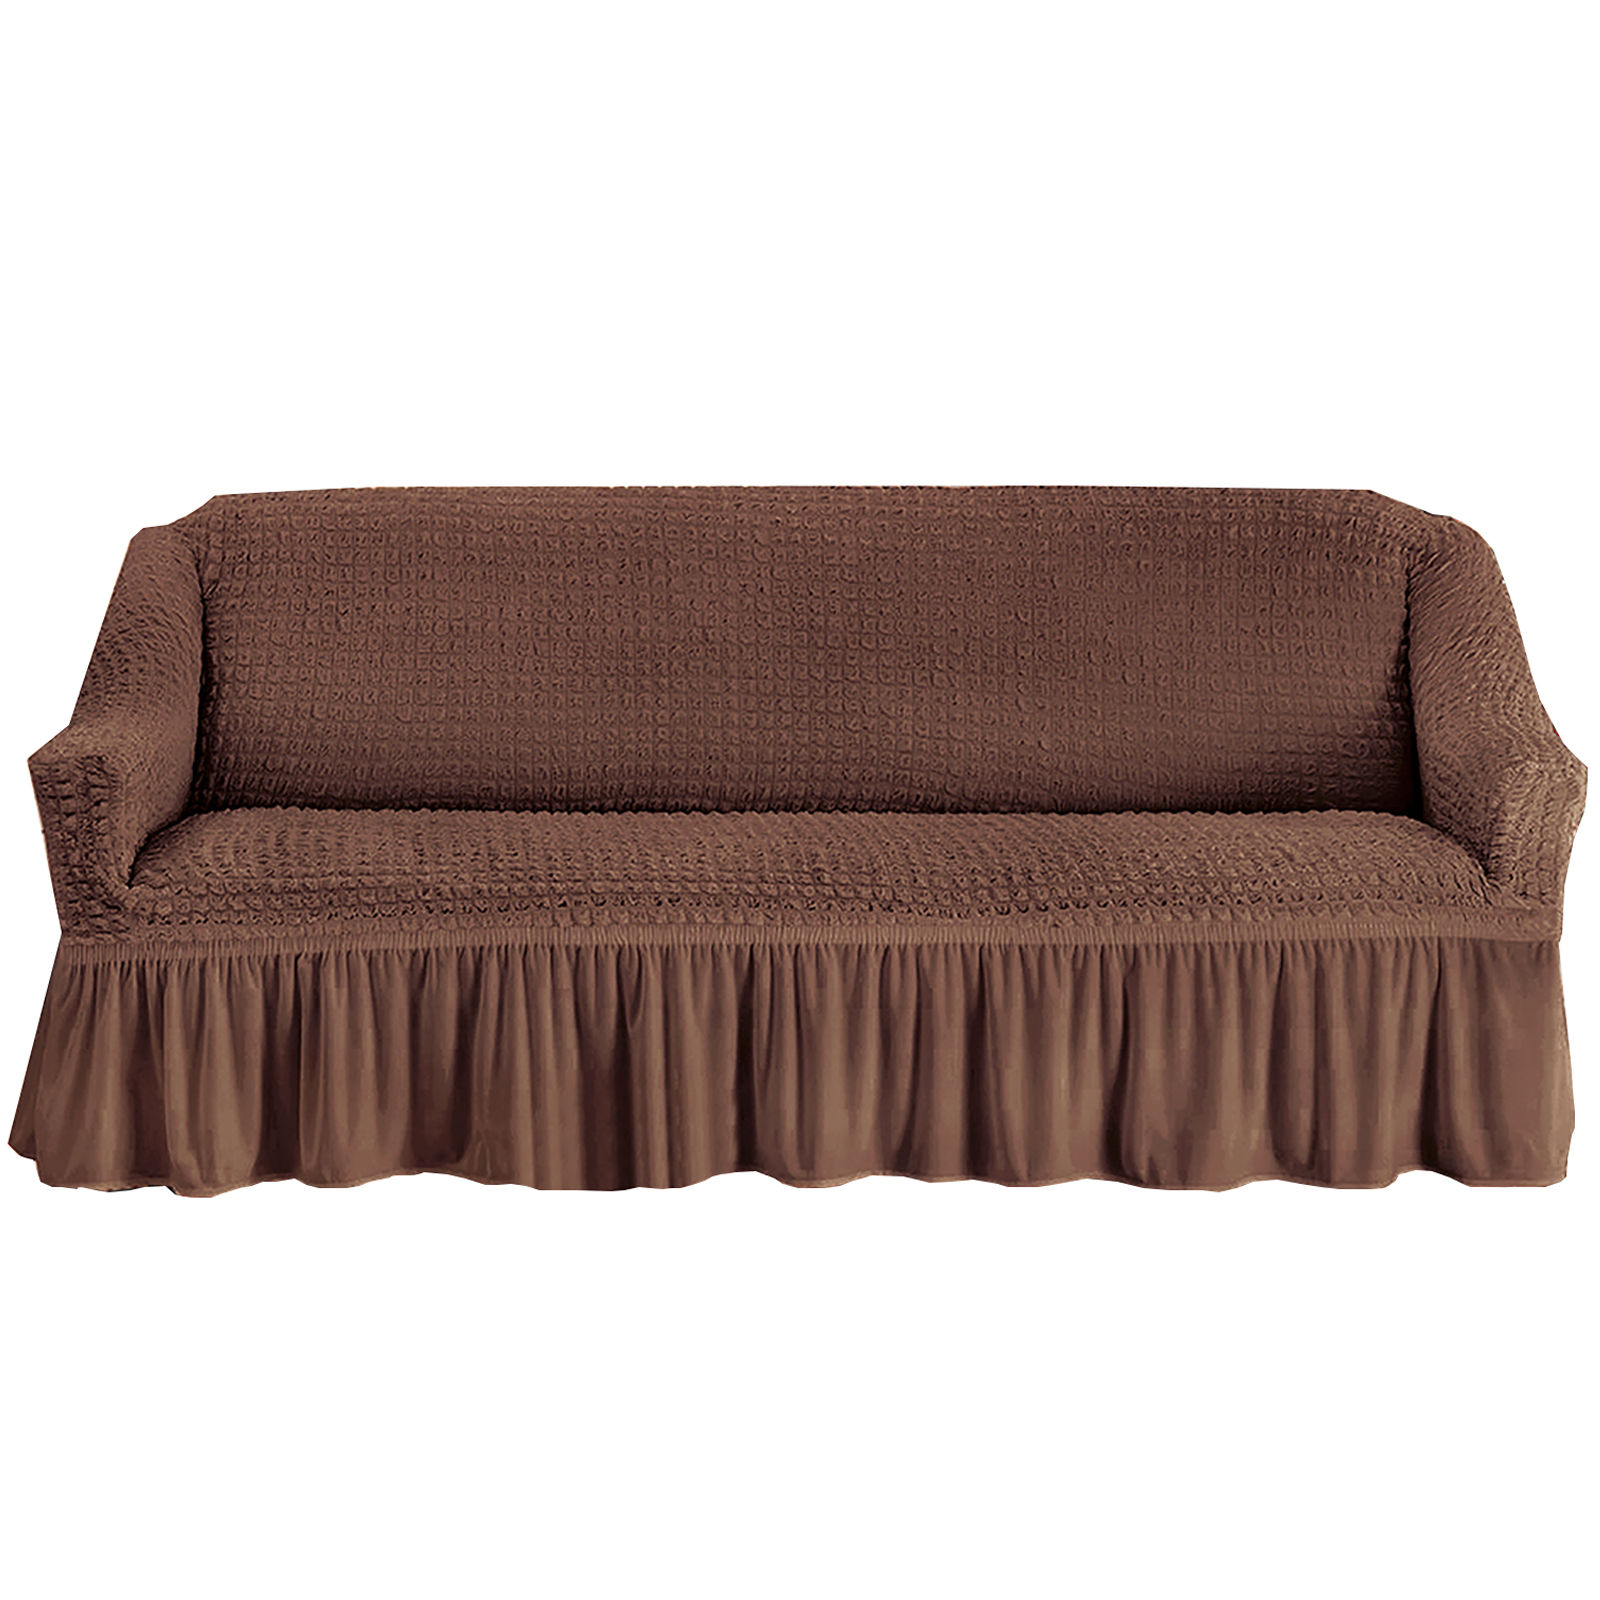 Stretch Sofa Slipcover, 3 Seater Sofa Slipcovers With Skirt With Armless Soft Sofa Cover Elastic Straps Sofa Slipcover For Living Room Kids Pets-Brown B-Medium